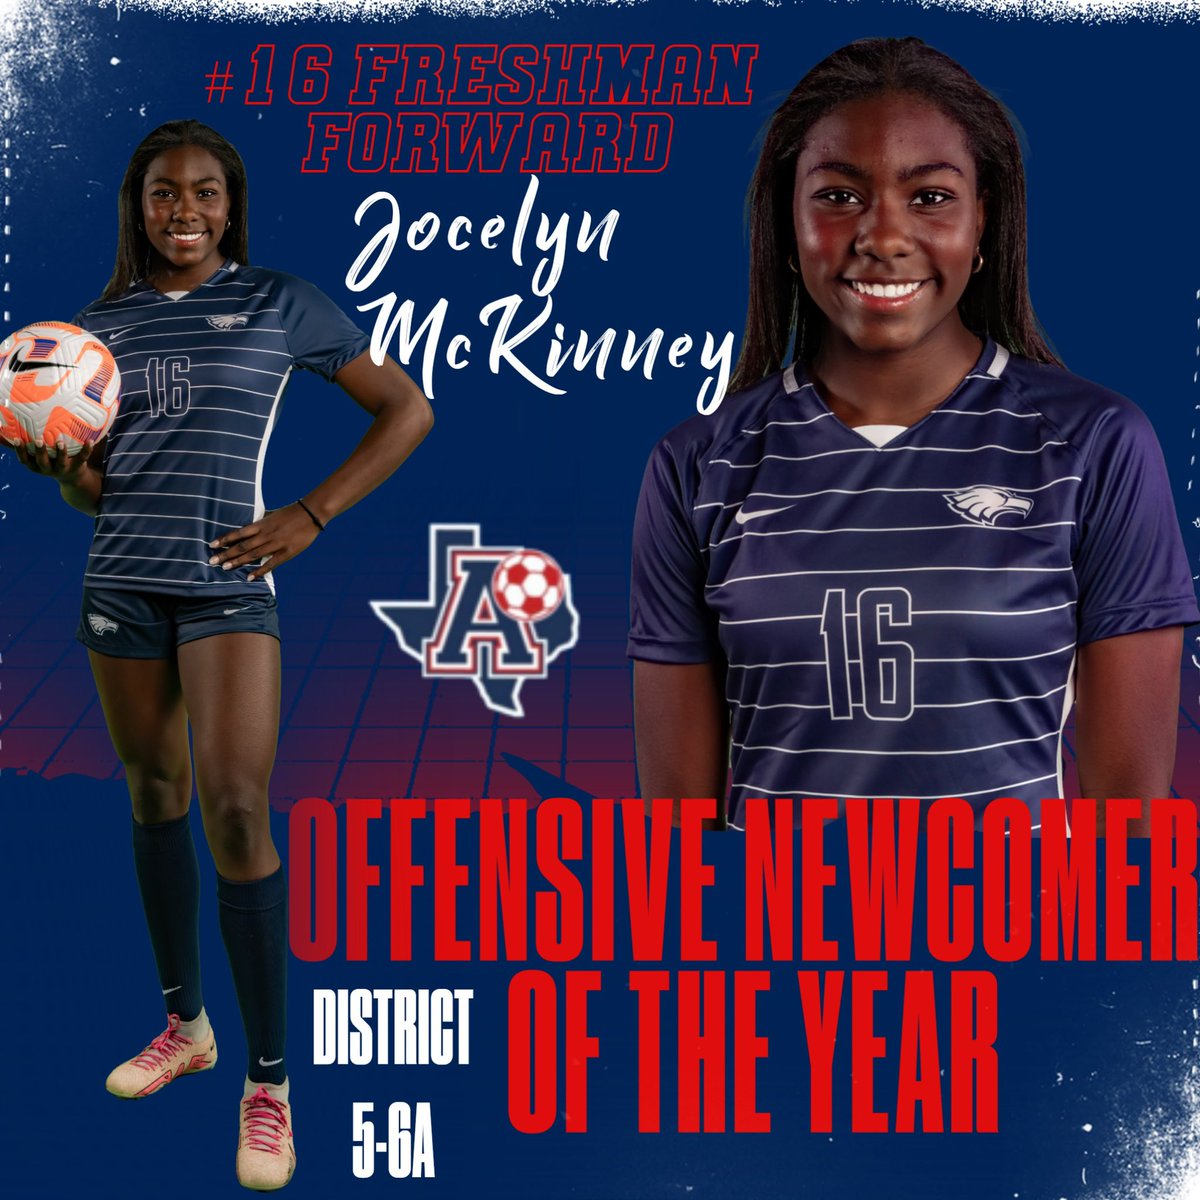 Congrats to Offensive Newcomer of the Year: Fr. Jocelyn McKinney